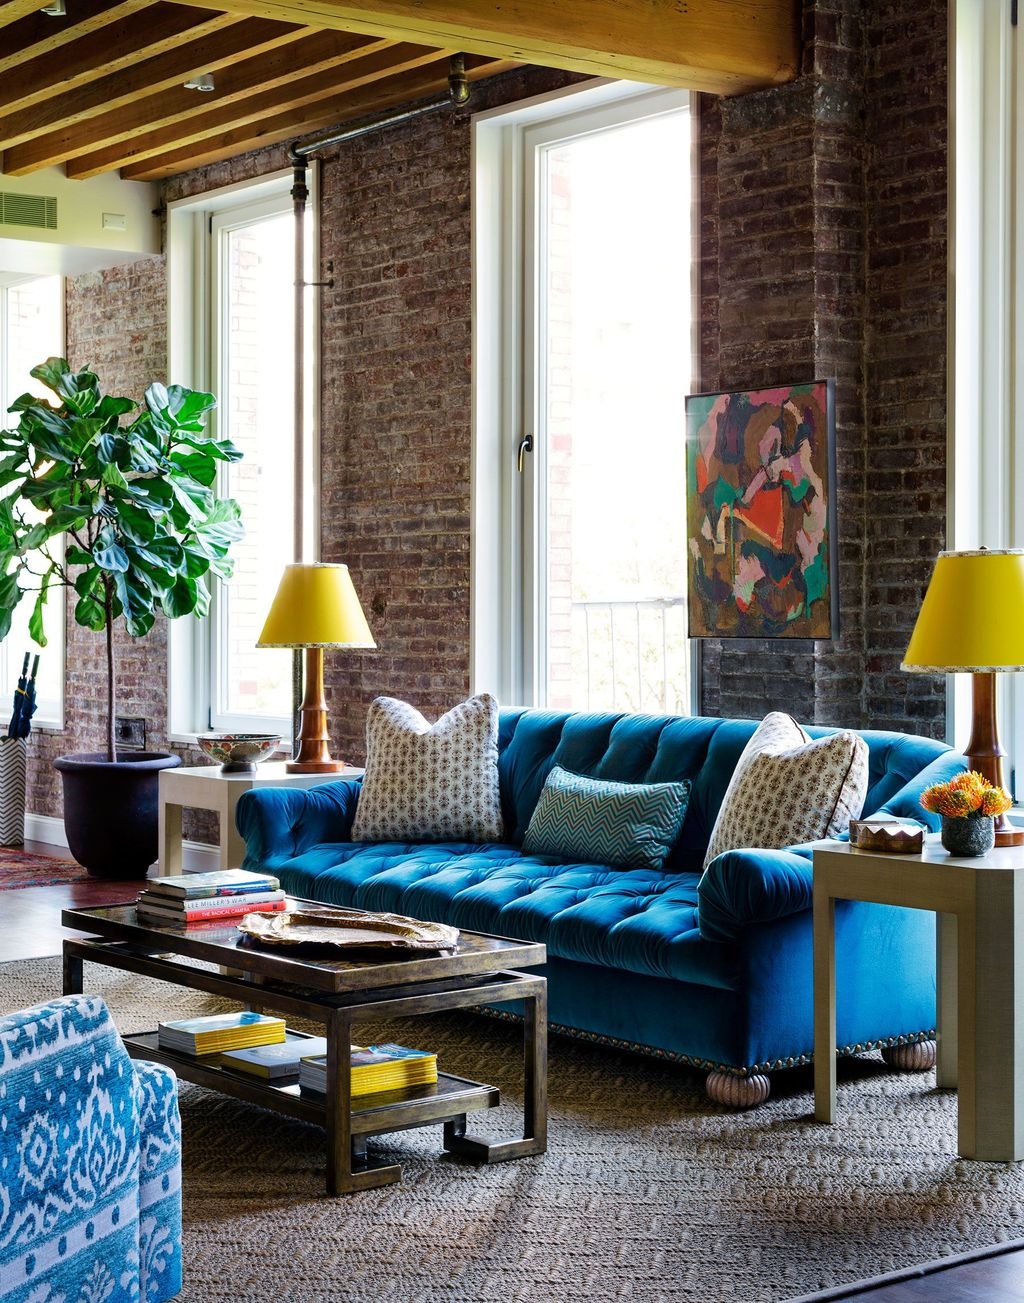 Best Ideas To Bring A Pop Of Bright Color Into Your Interior Design 29